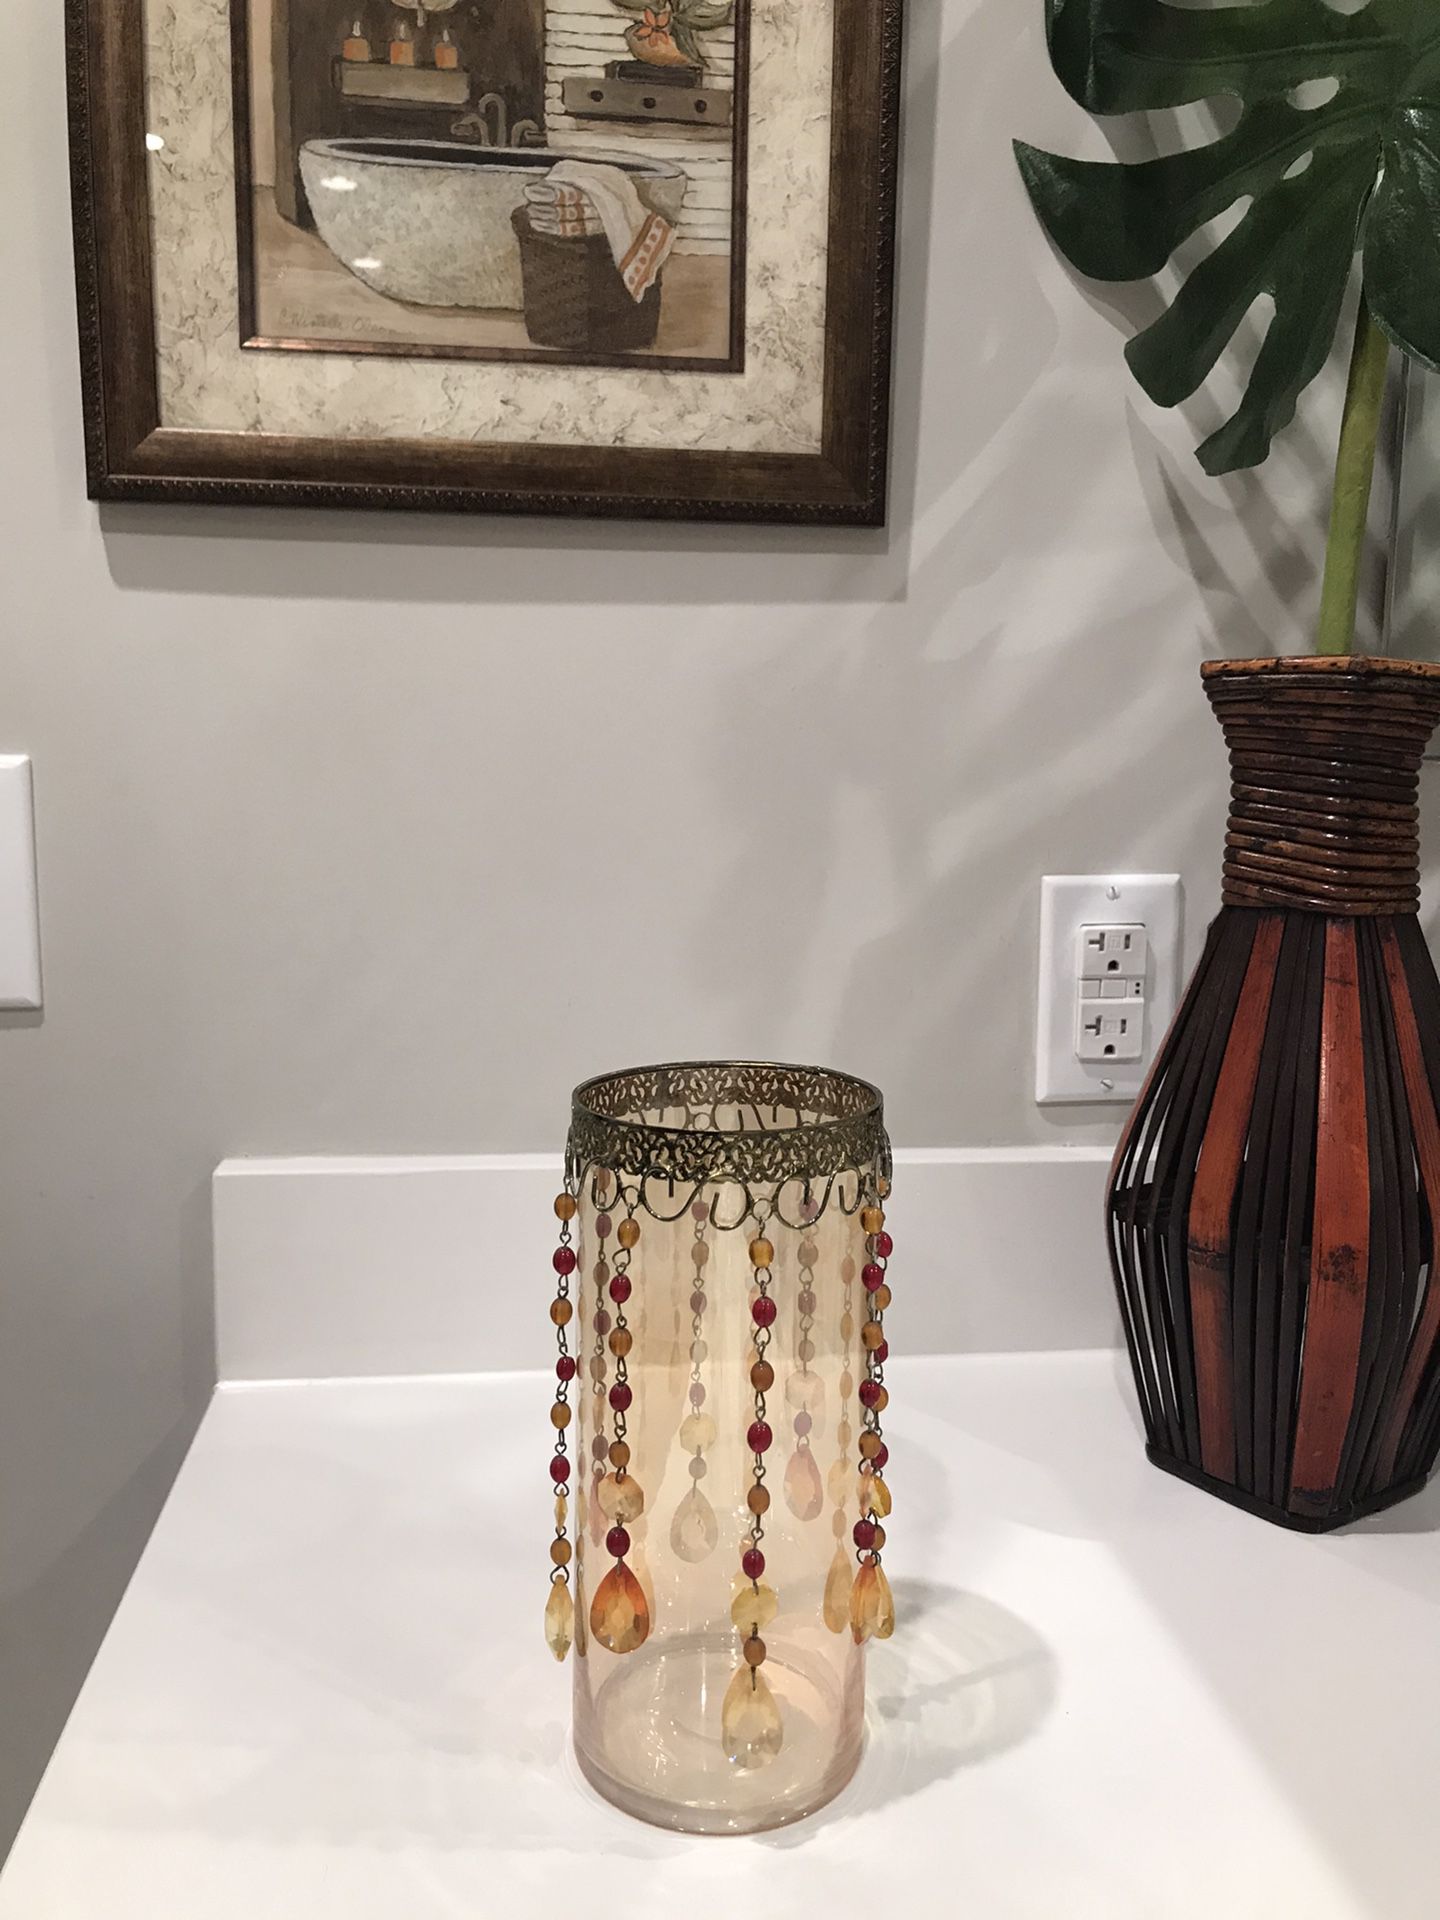 Glass Candle holder with hanging beads